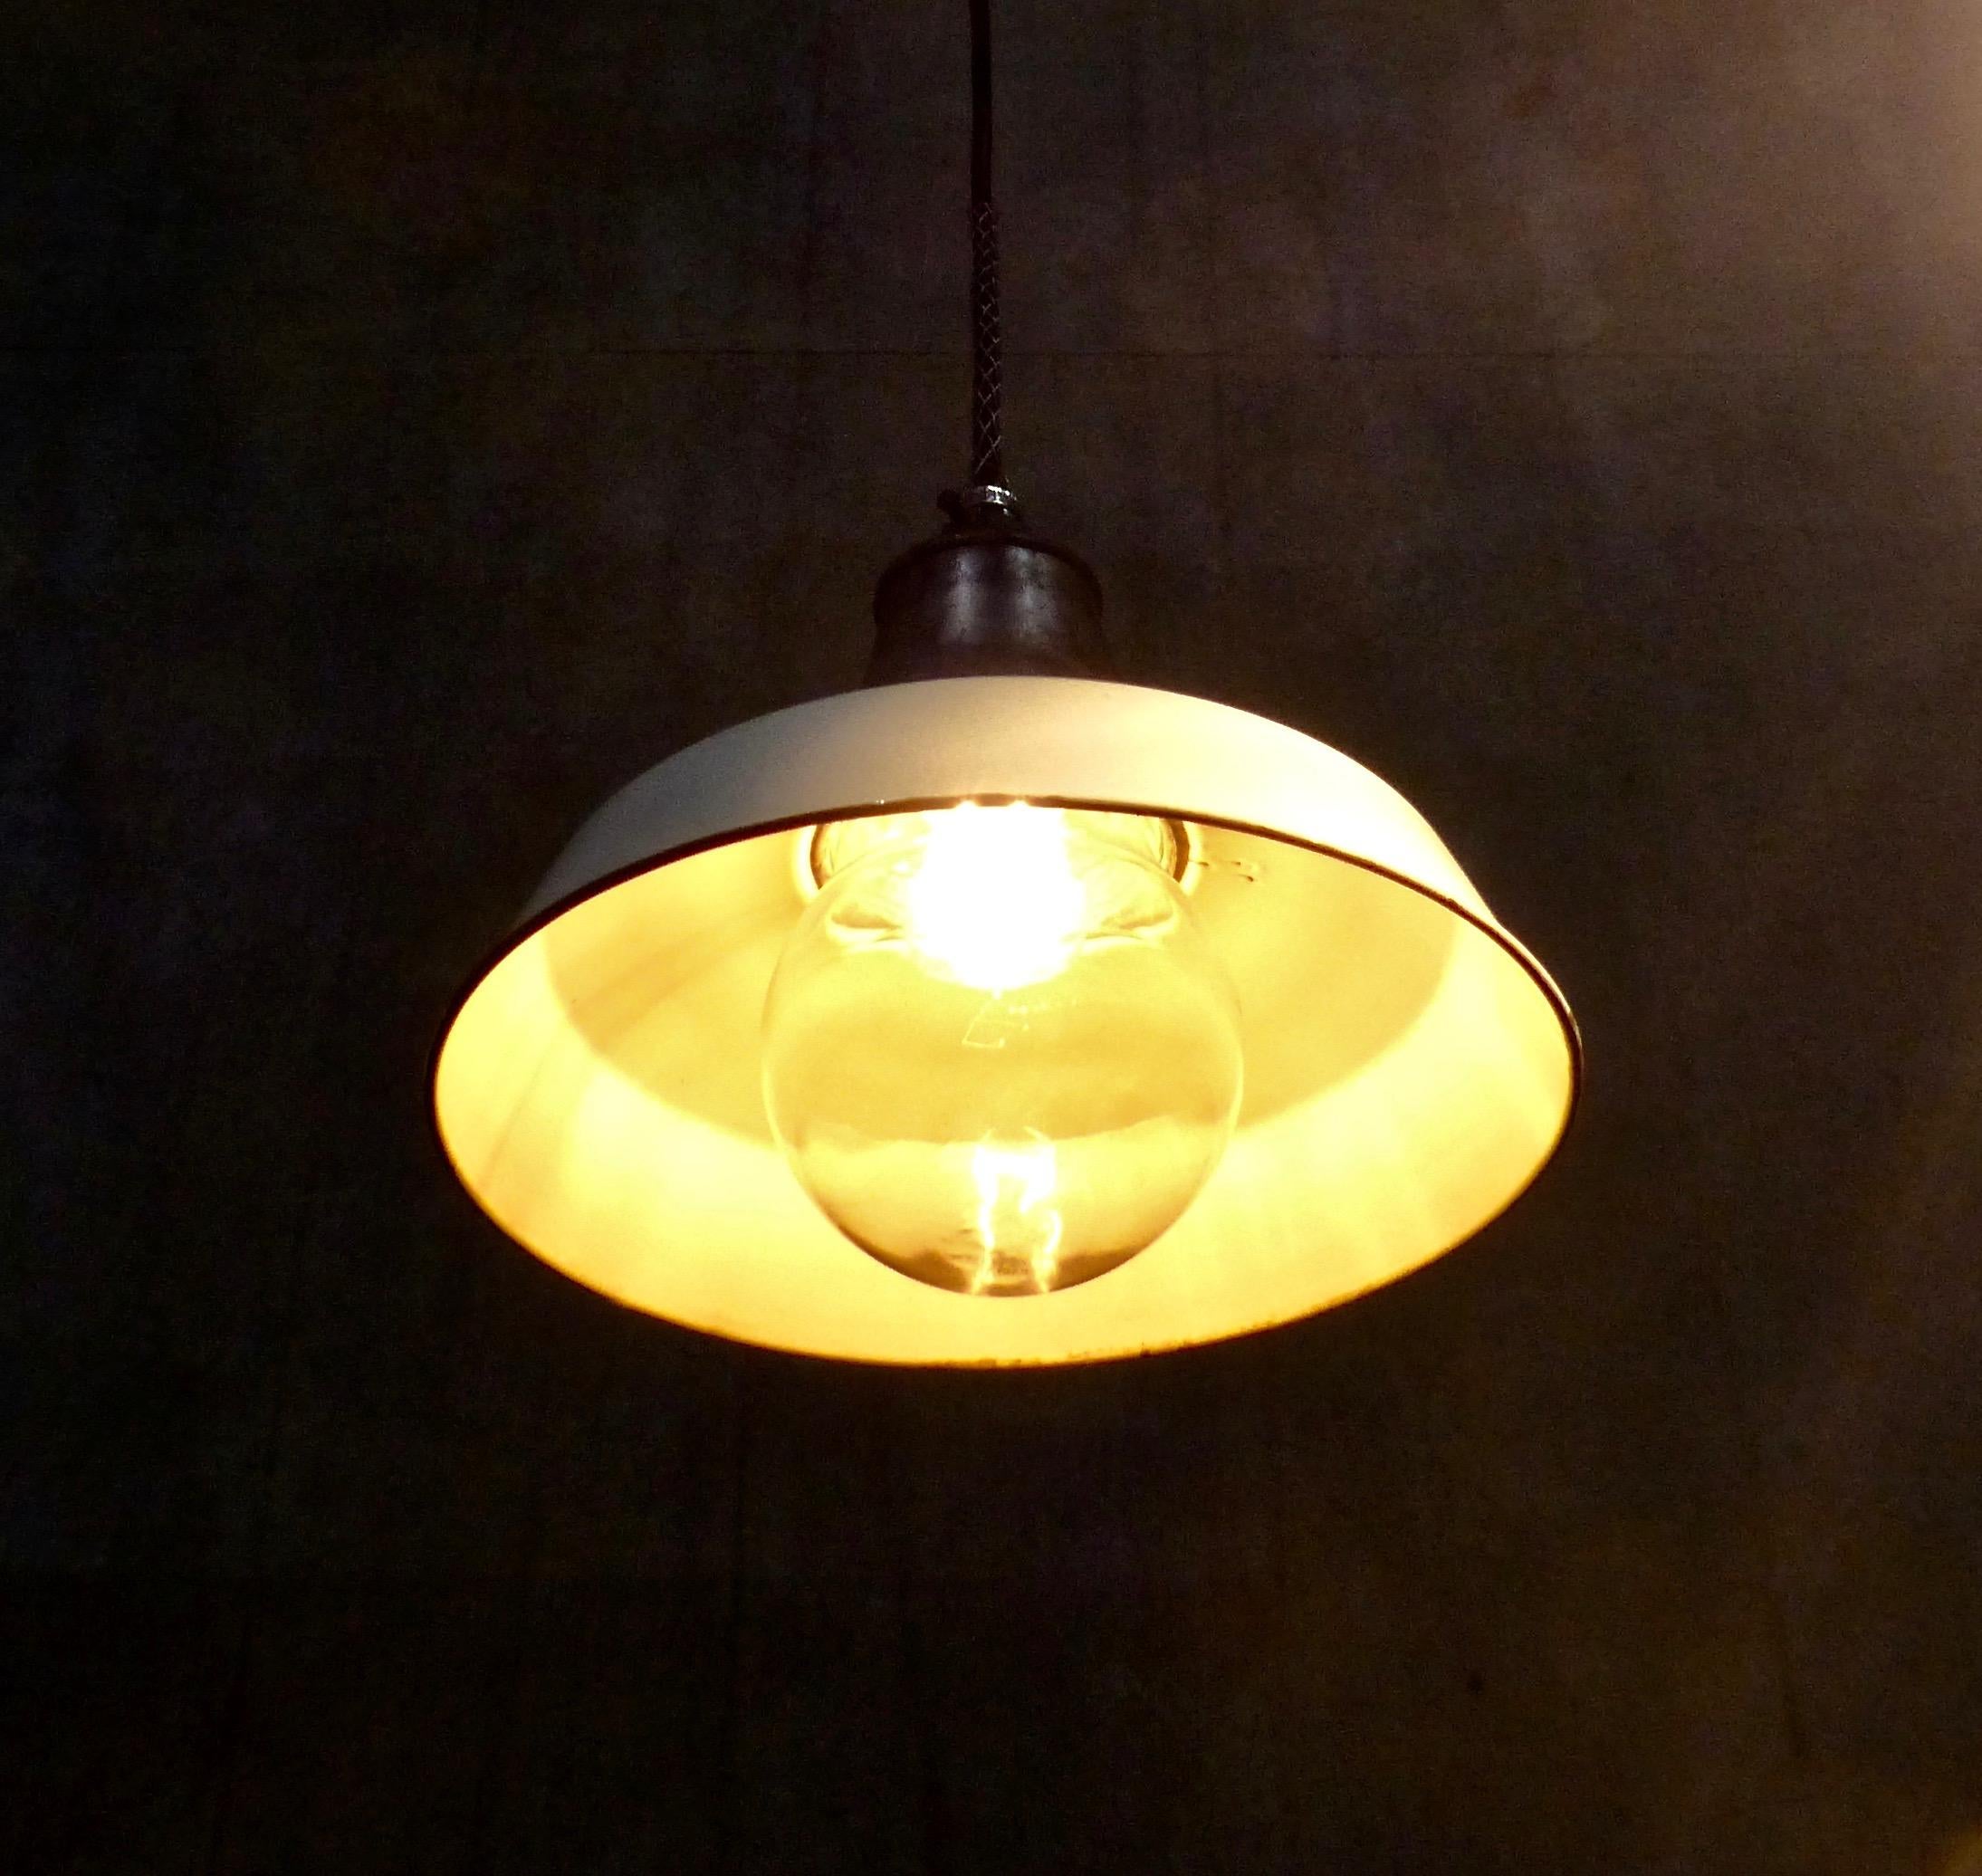 Set of four cast aluminium pendant lights, circa 1940. These authentic industrial factory lights feature original white enamel shades and glass globes. Re-wired and CSA approved to current electrical standards; ceiling mounting plate included.